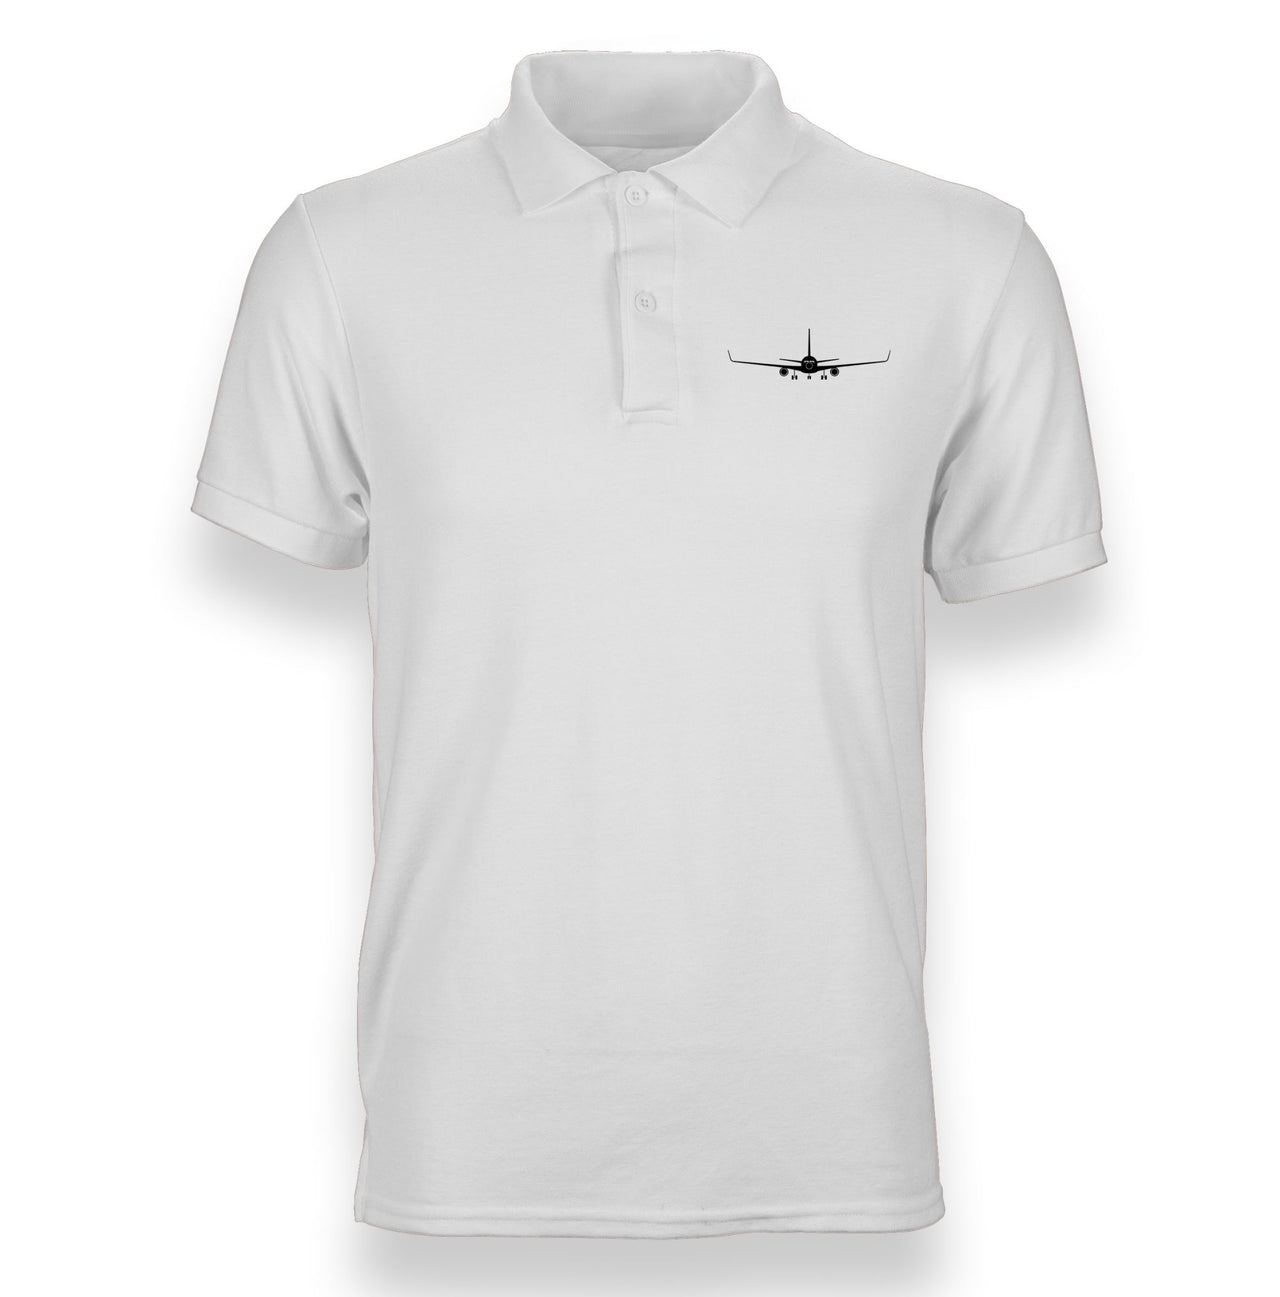 Boeing 767 Silhouette Designed "WOMEN" Polo T-Shirts